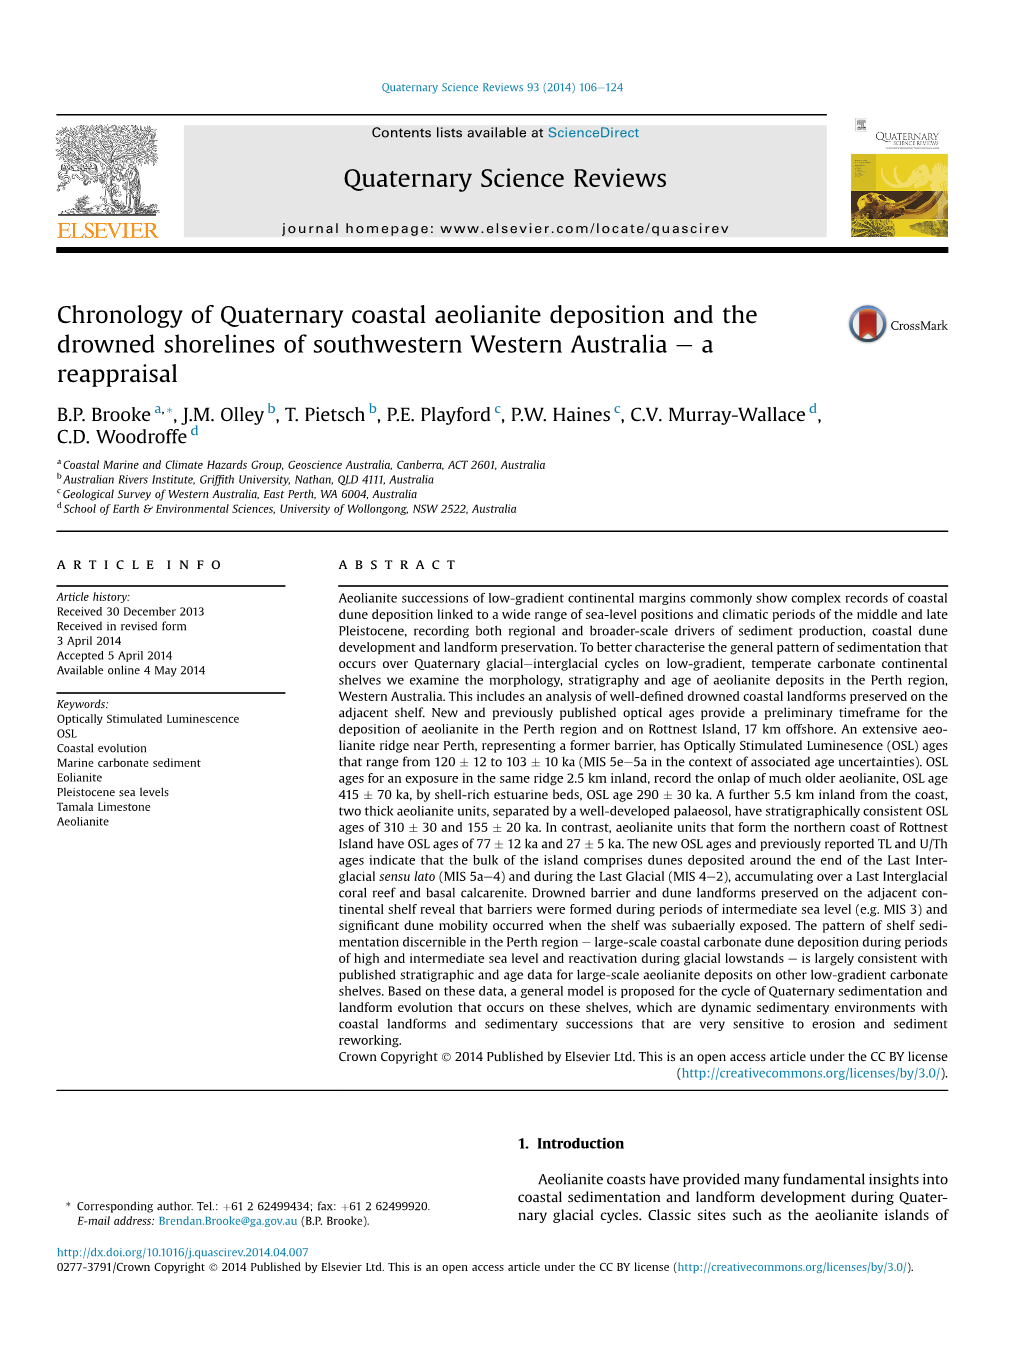 Chronology of Quaternary Coastal Aeolianite Deposition and the Drowned Shorelines of Southwestern Western Australia E a Reappraisal